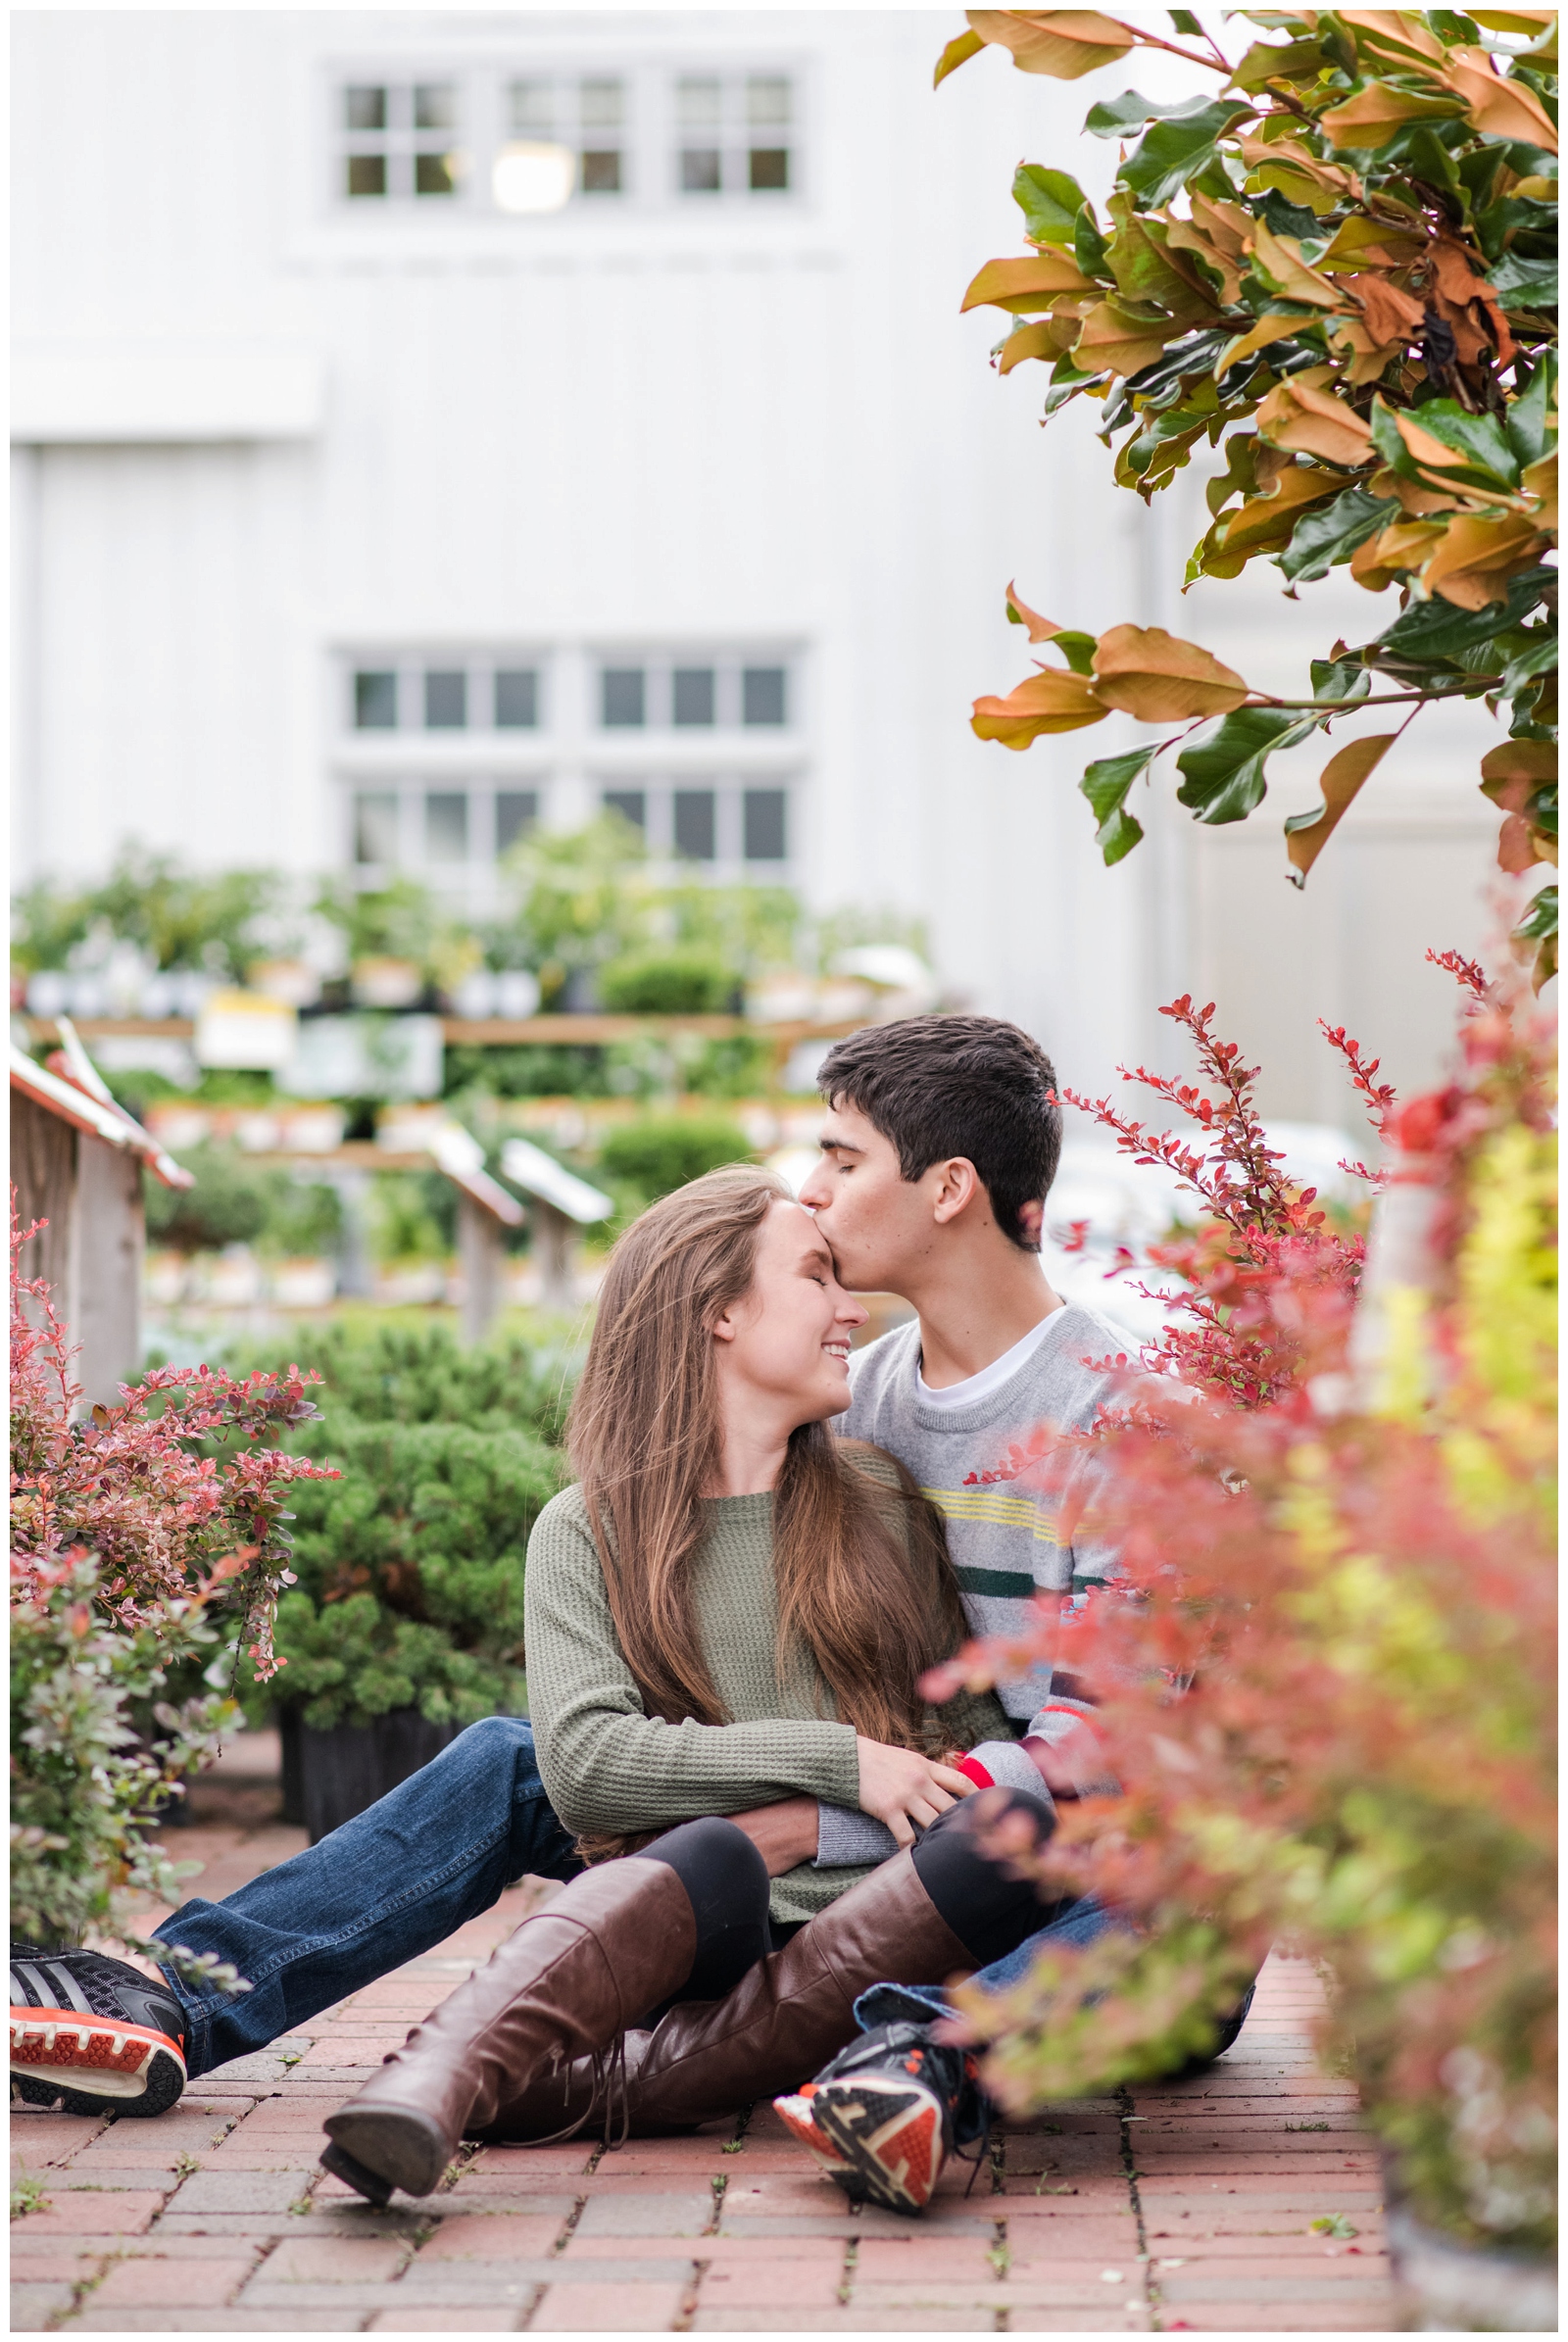 groom kisses bride on the forehead while they sit near red and orange plants during greenhouse inspired engagement session